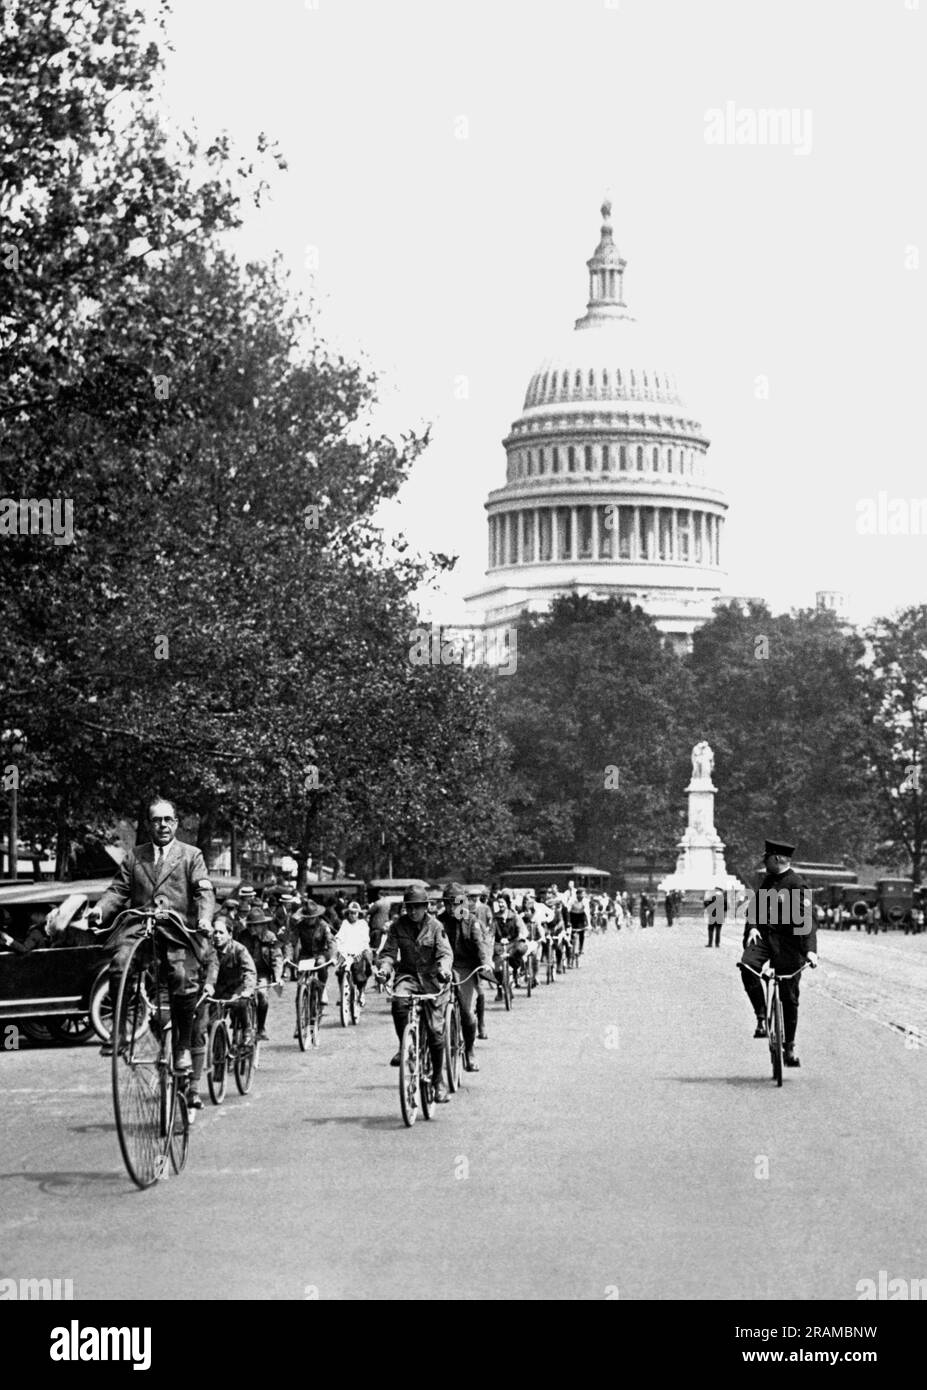 Washington, D.C.:  May 19, 1924 Bicycle enthusiasts remembering the old days of the bicycle craze take their yearly get together up Pennsylvania Avenue. All of Washington stopped to watch them. Stock Photo